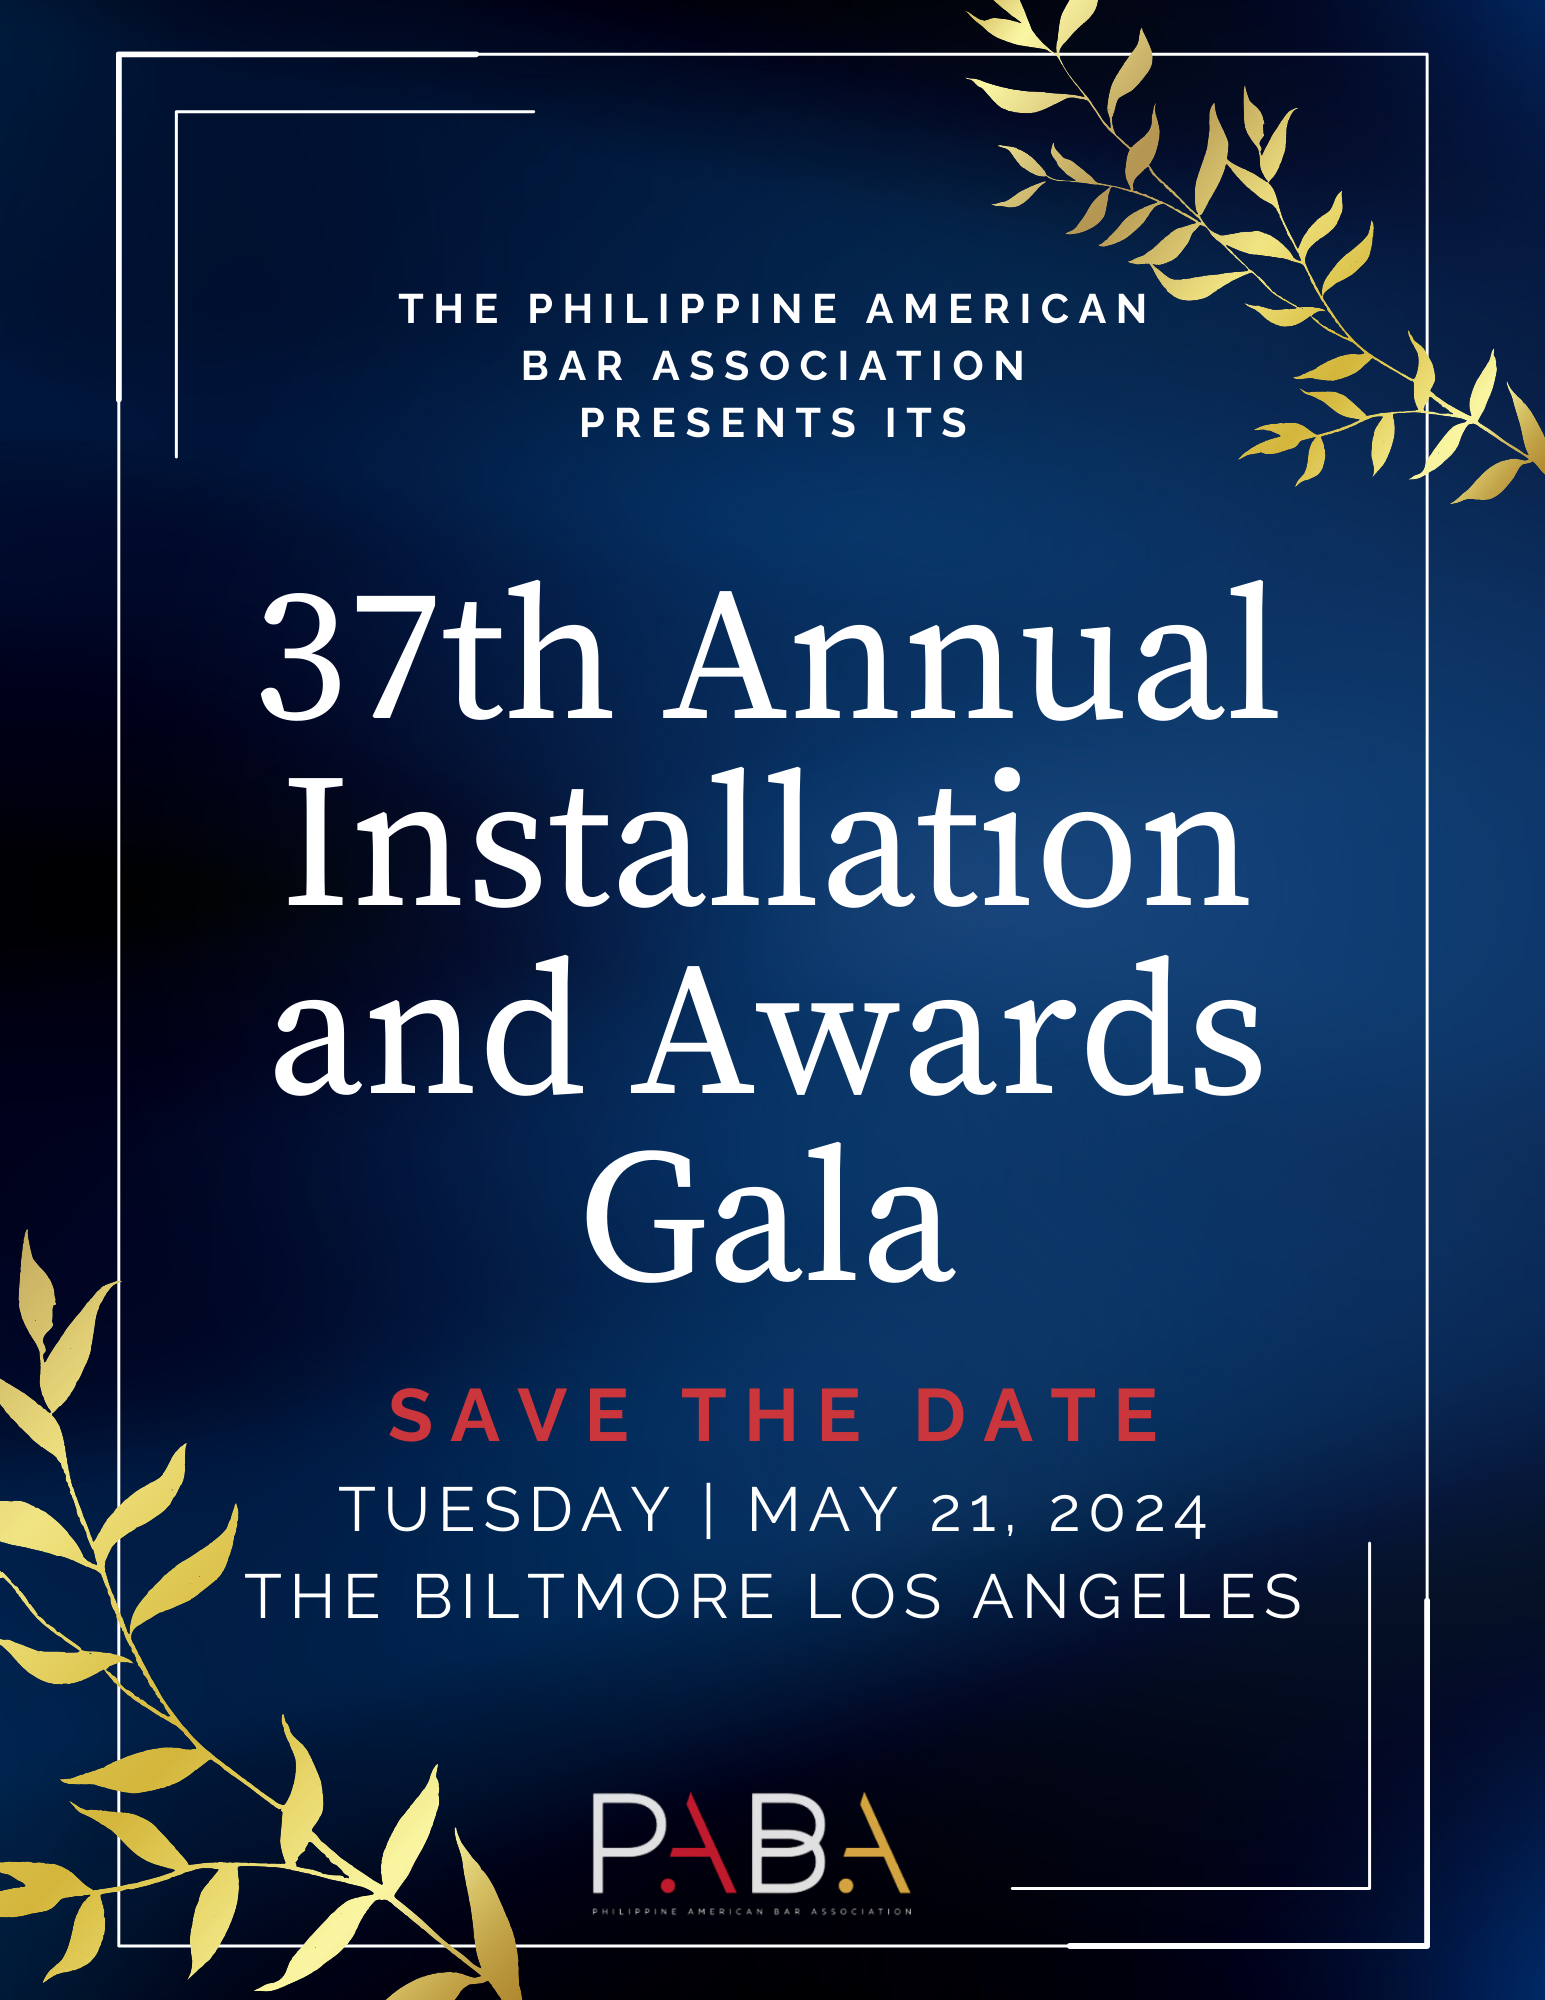 SAVE THE DATE – MAY 21, 2024! PABA Presents Its 37th Annual Installation & Awards Gala